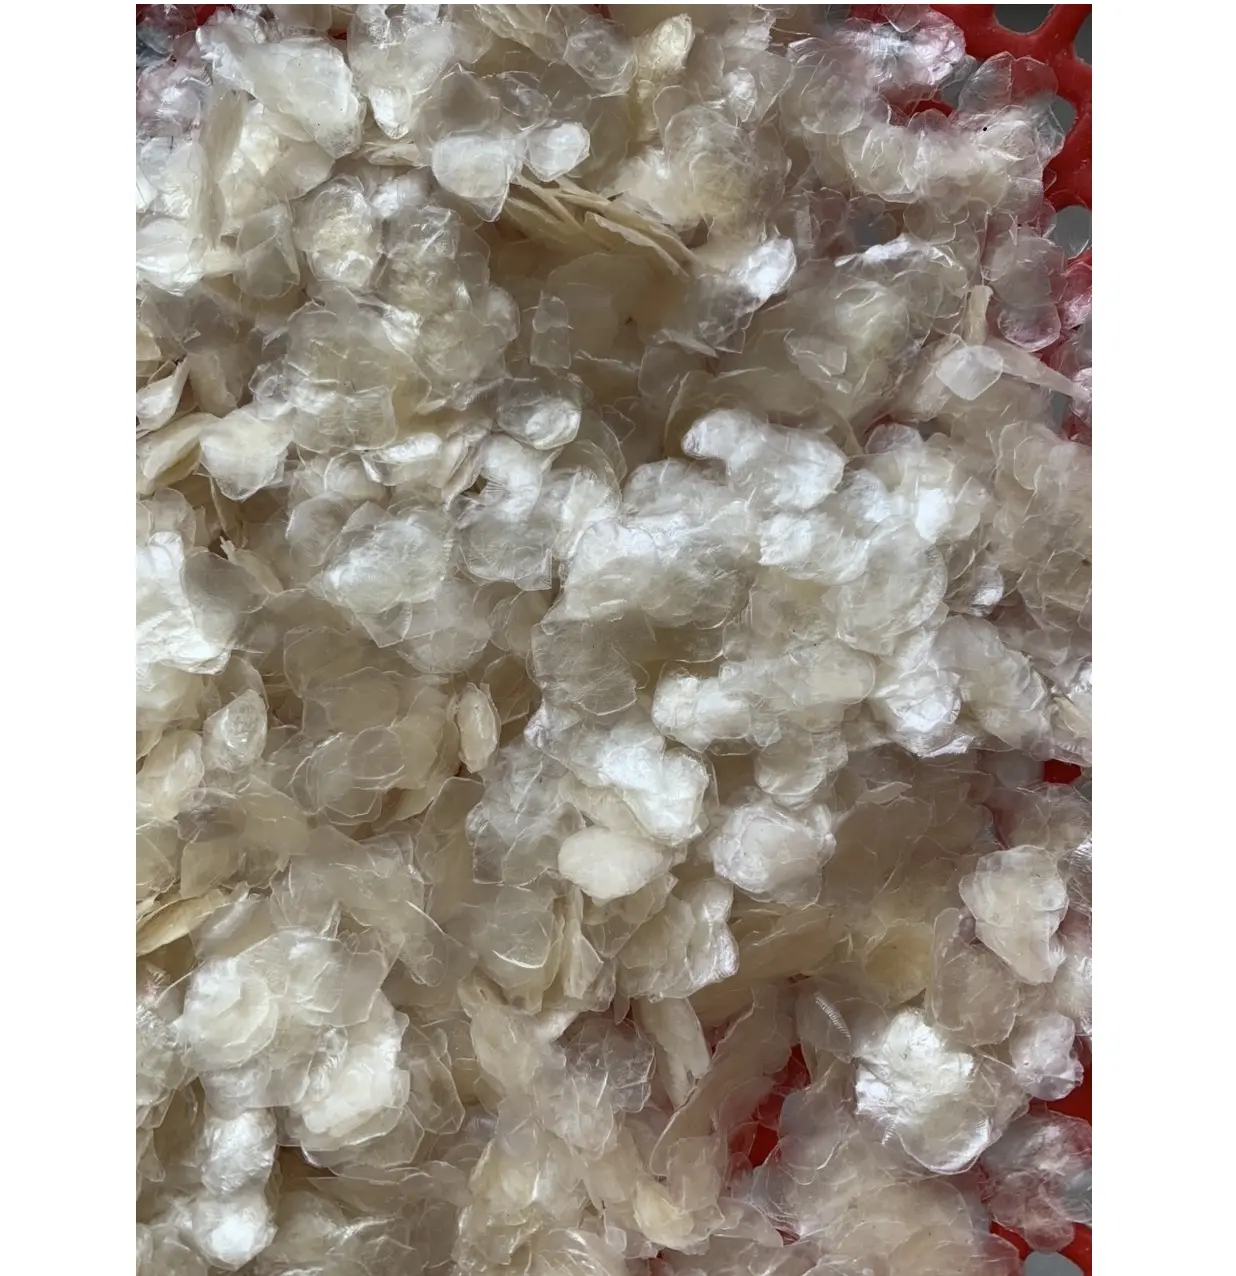 Dried Fish Scales High Quality from Vietnam // HIGH QUALITY // GOOD PRICE // Ms. Esther (WhatsApp: +84 963590549)